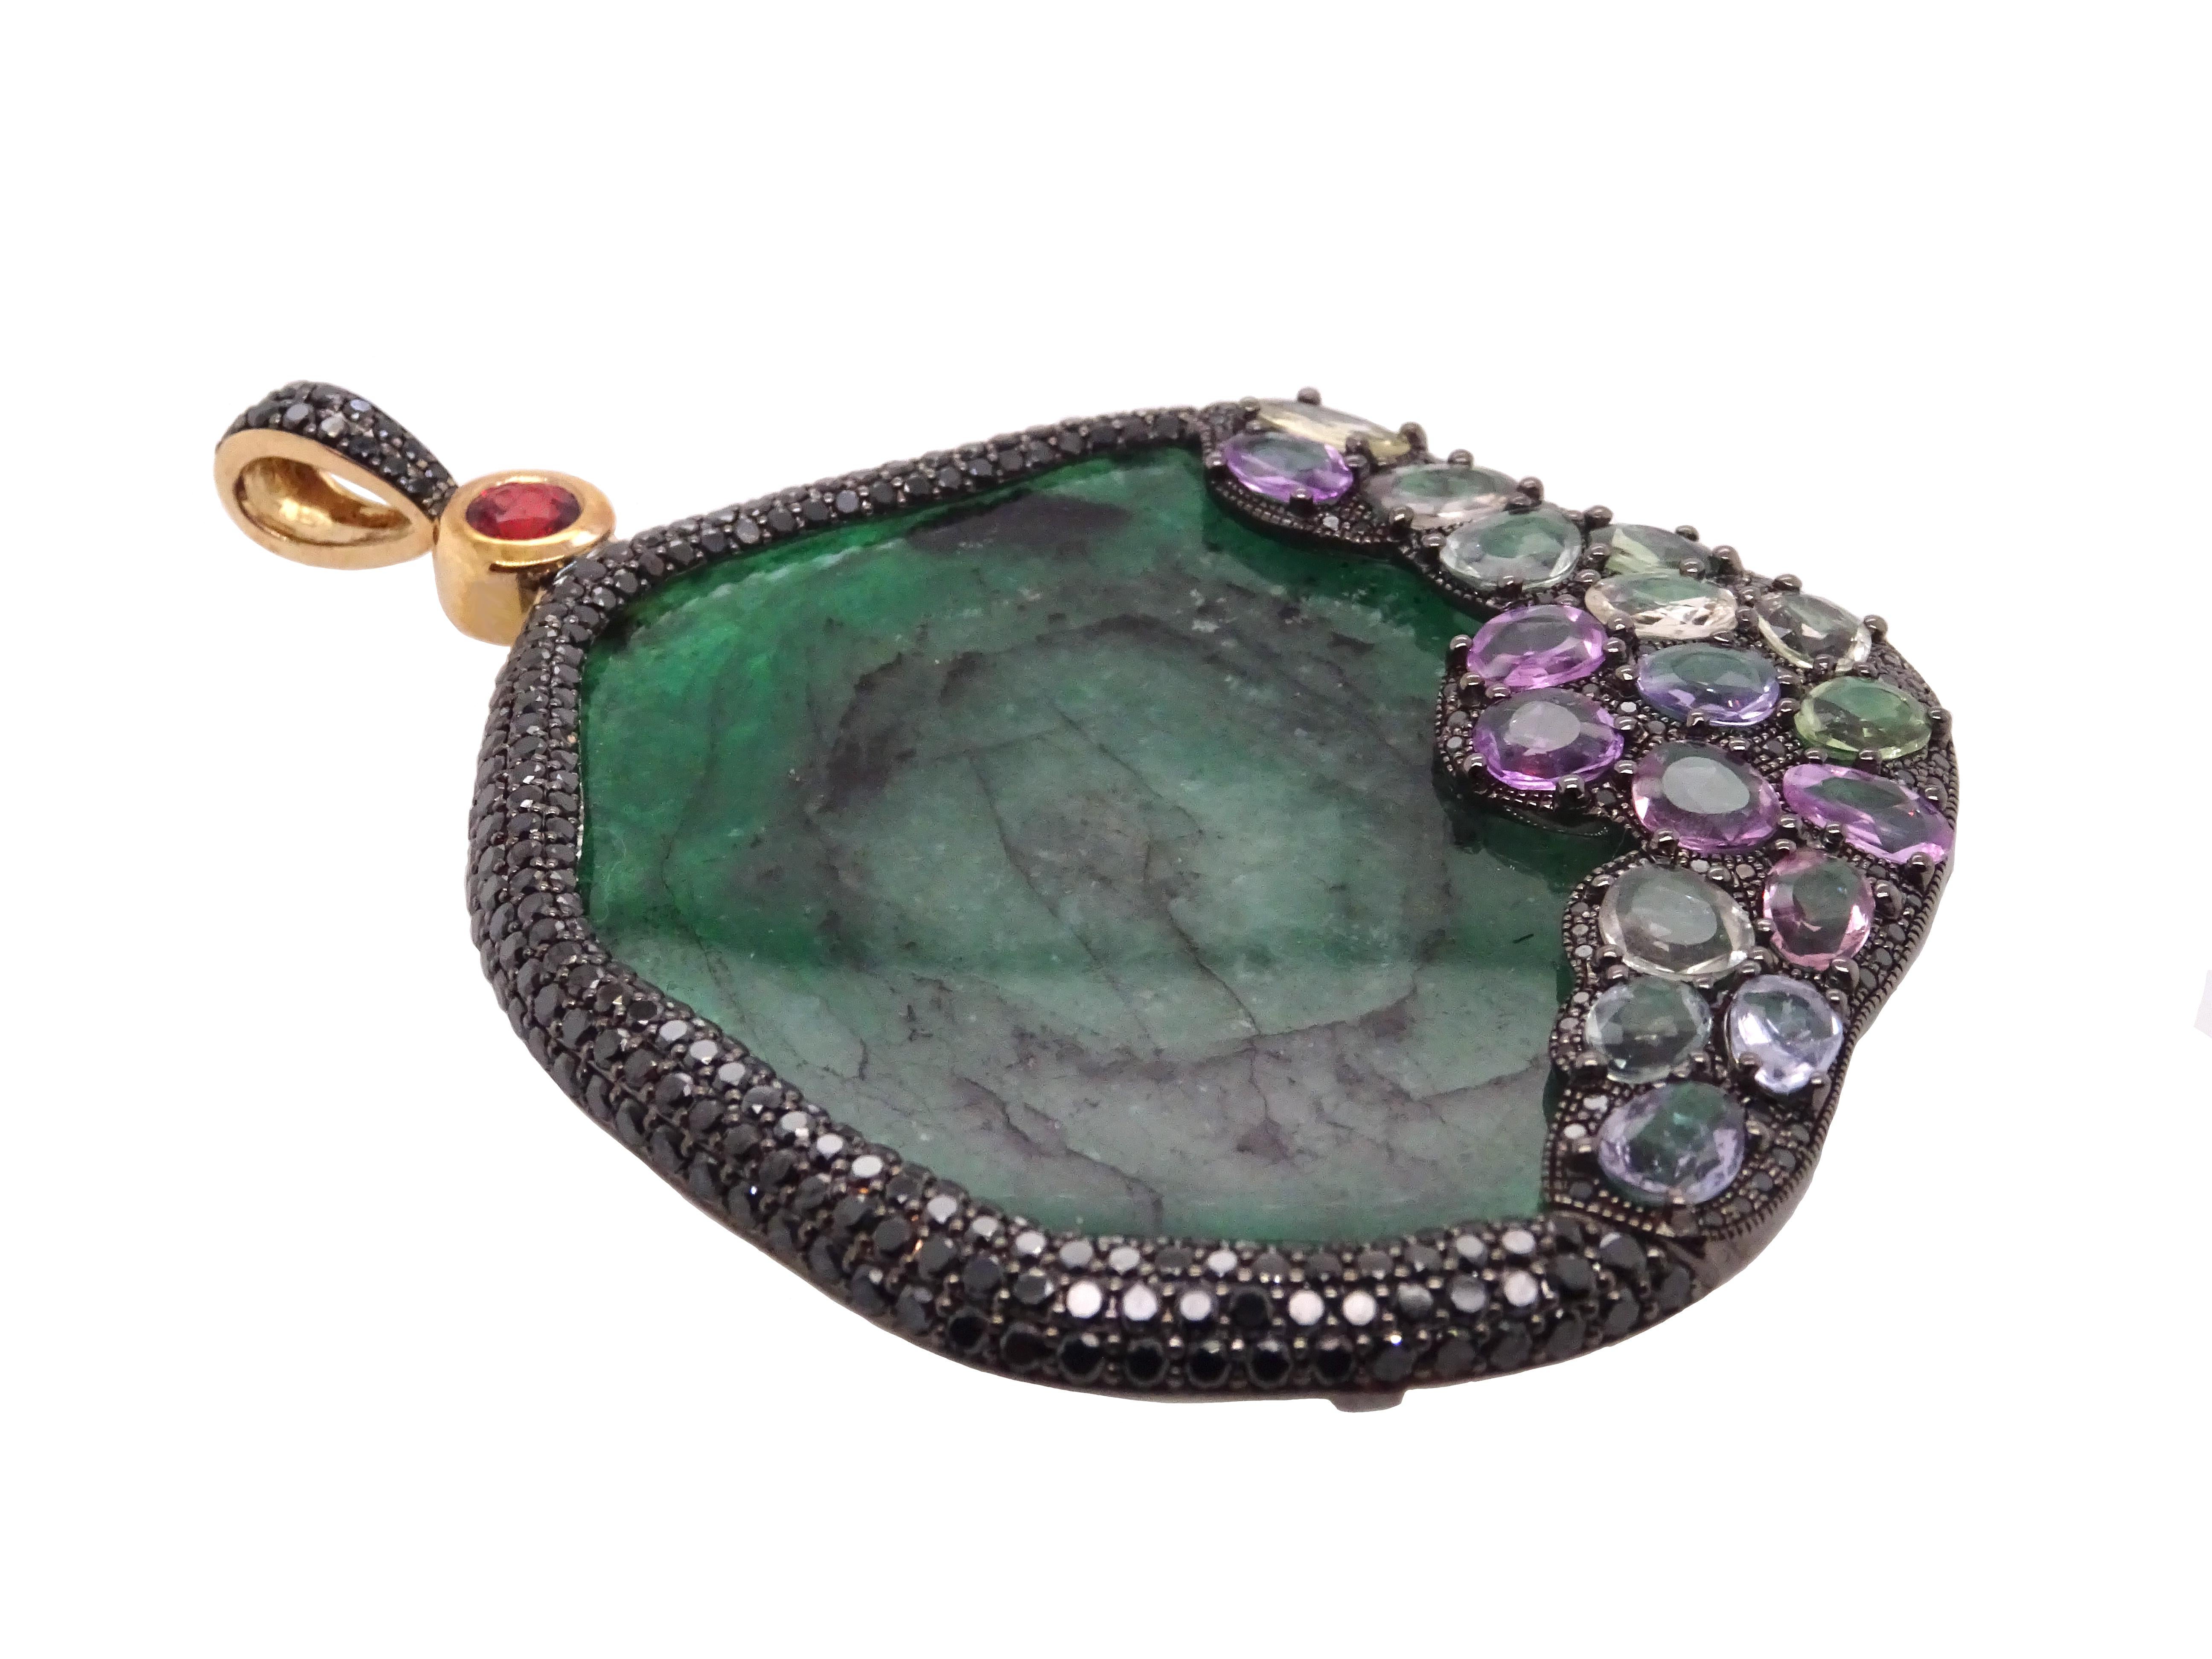 Pure Venom collection by VOTIVE.

Indulge in the captivating allure of this pendant, featuring an exquisite combination of emerald, black diamonds, and red & multicolored sapphires, set in 18K yellow gold. The distinctive center emerald is